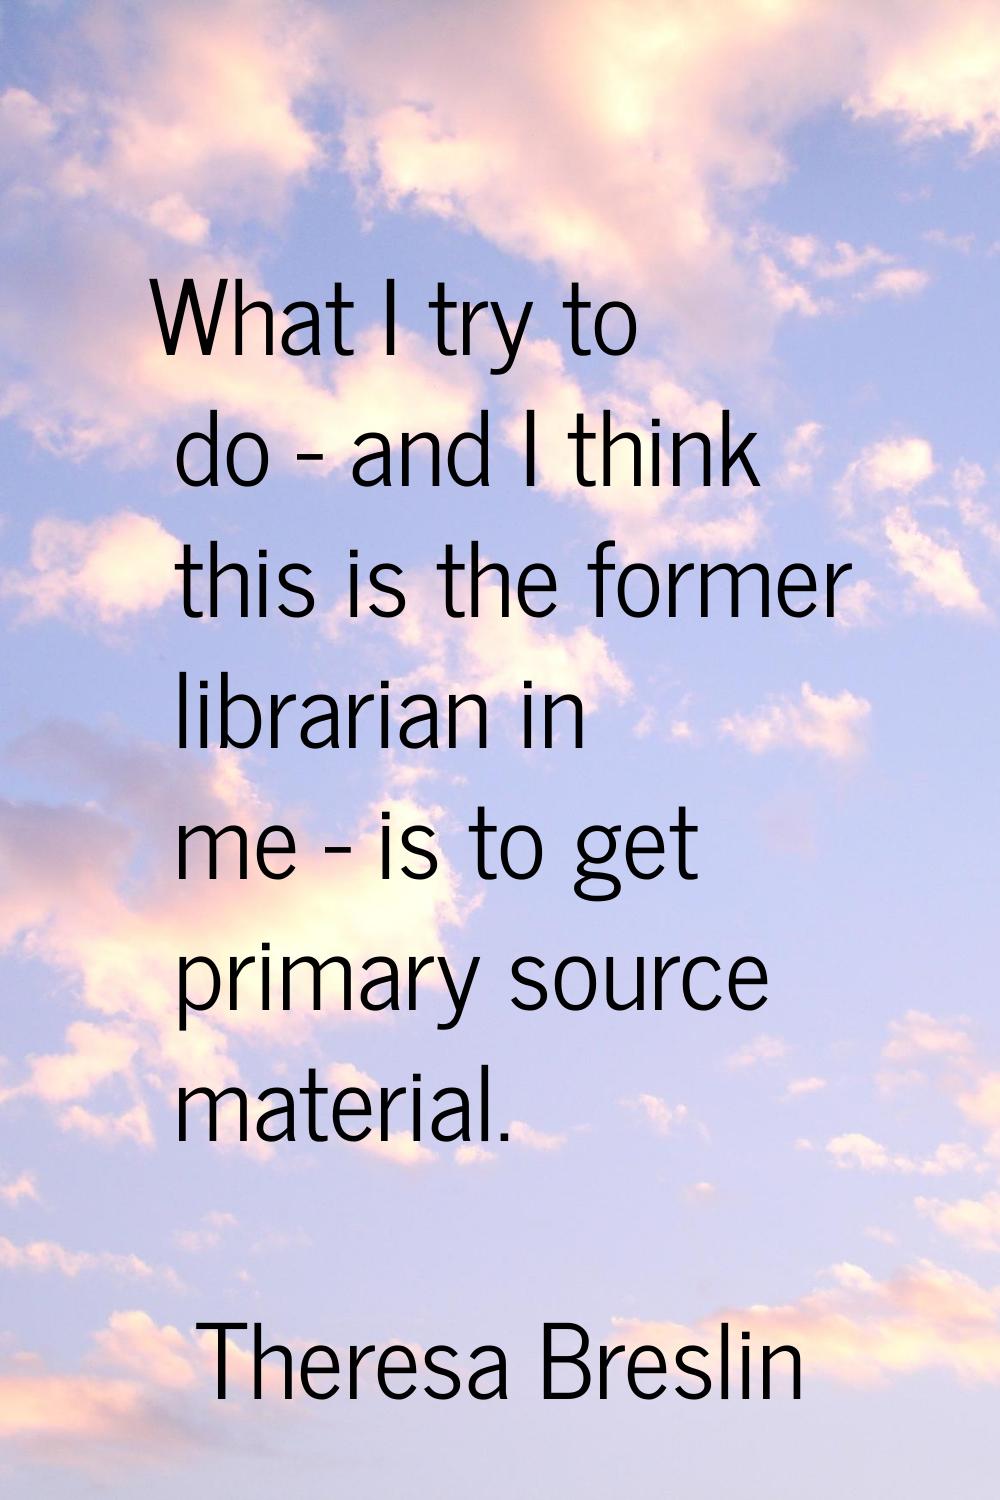 What I try to do - and I think this is the former librarian in me - is to get primary source materi